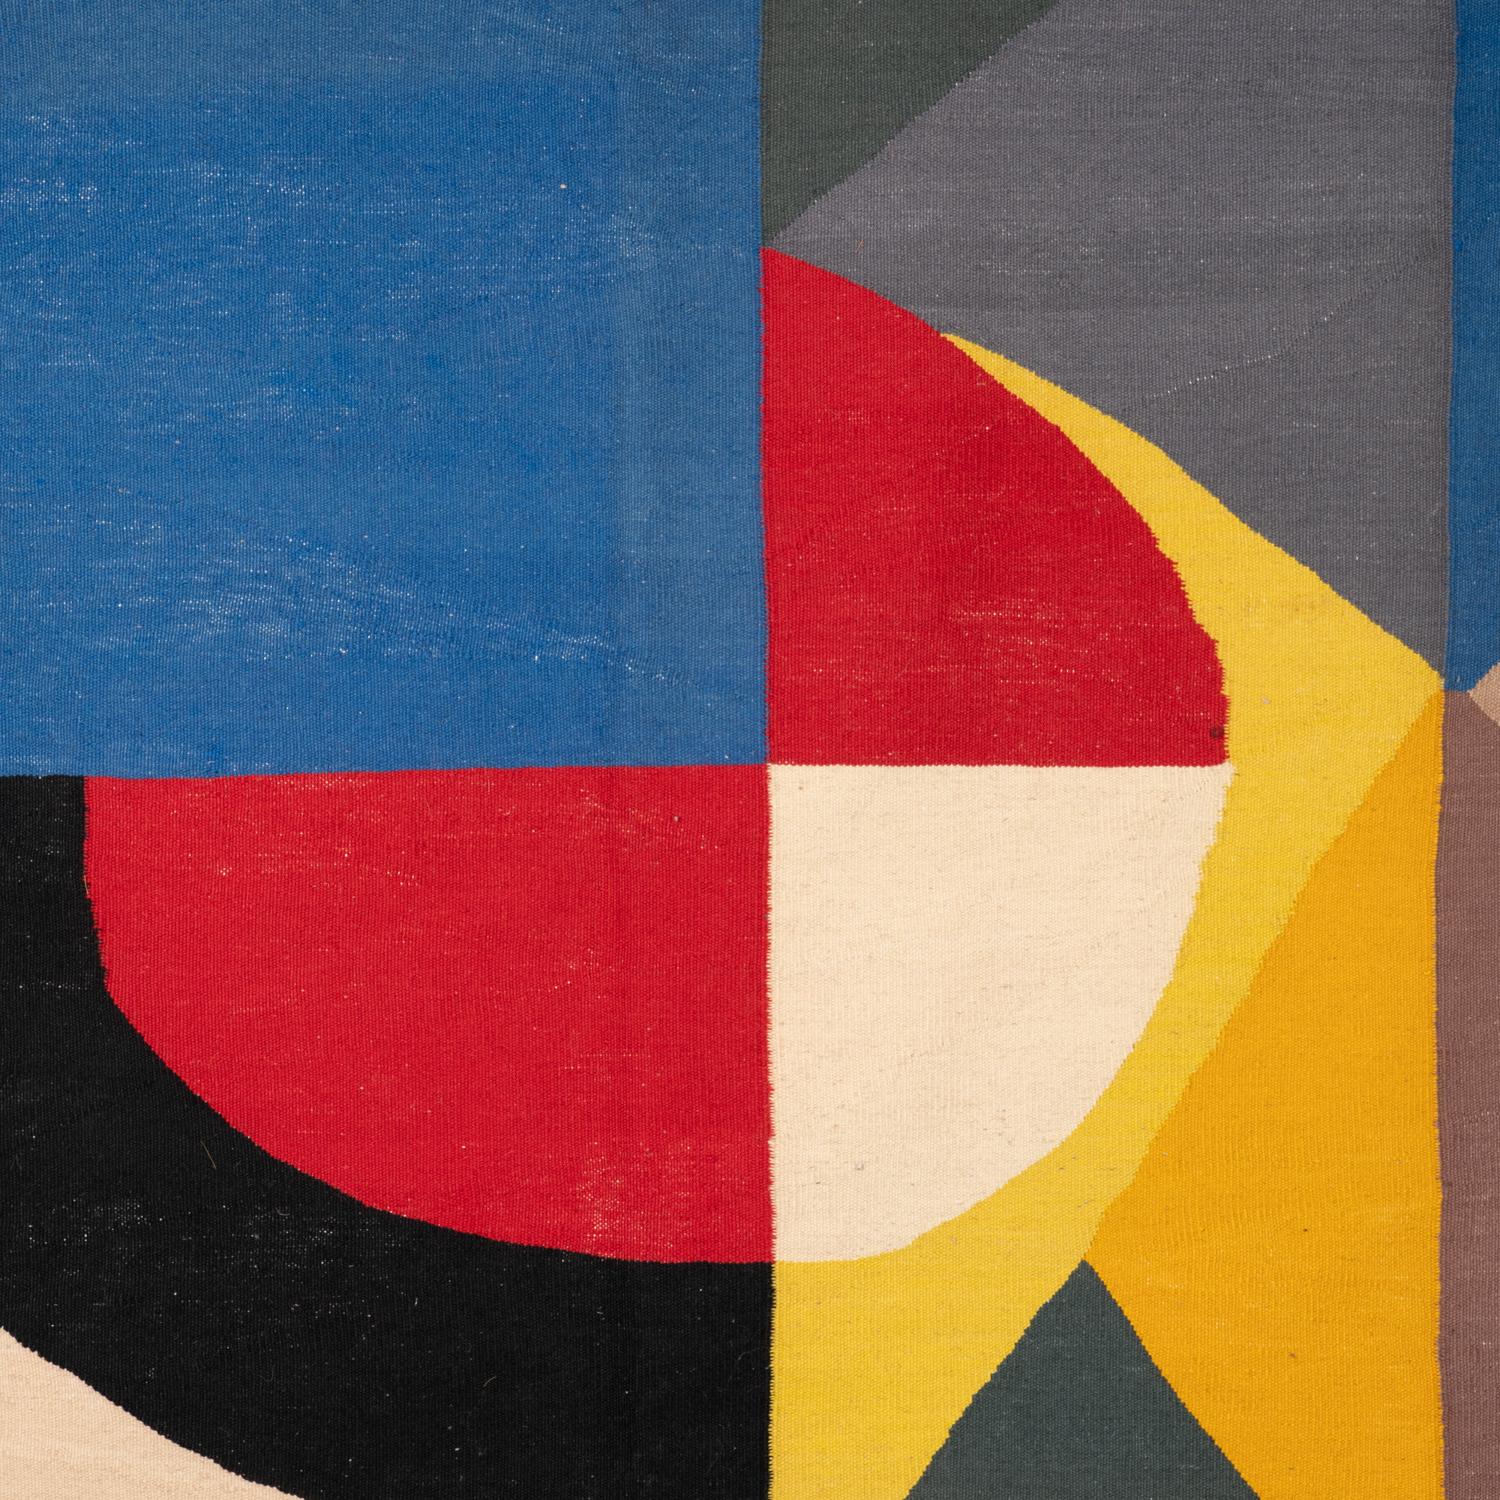 Rug, or tapestry, inspired by Sonia Delaunay, with abstract and geometric shapes, in red, black, yellow and beige tones. Hand-woven in Merino wool.

Contemporary work of craftsmen.

Numbered 1/8. Area : 6 square meters. Density : 840 000